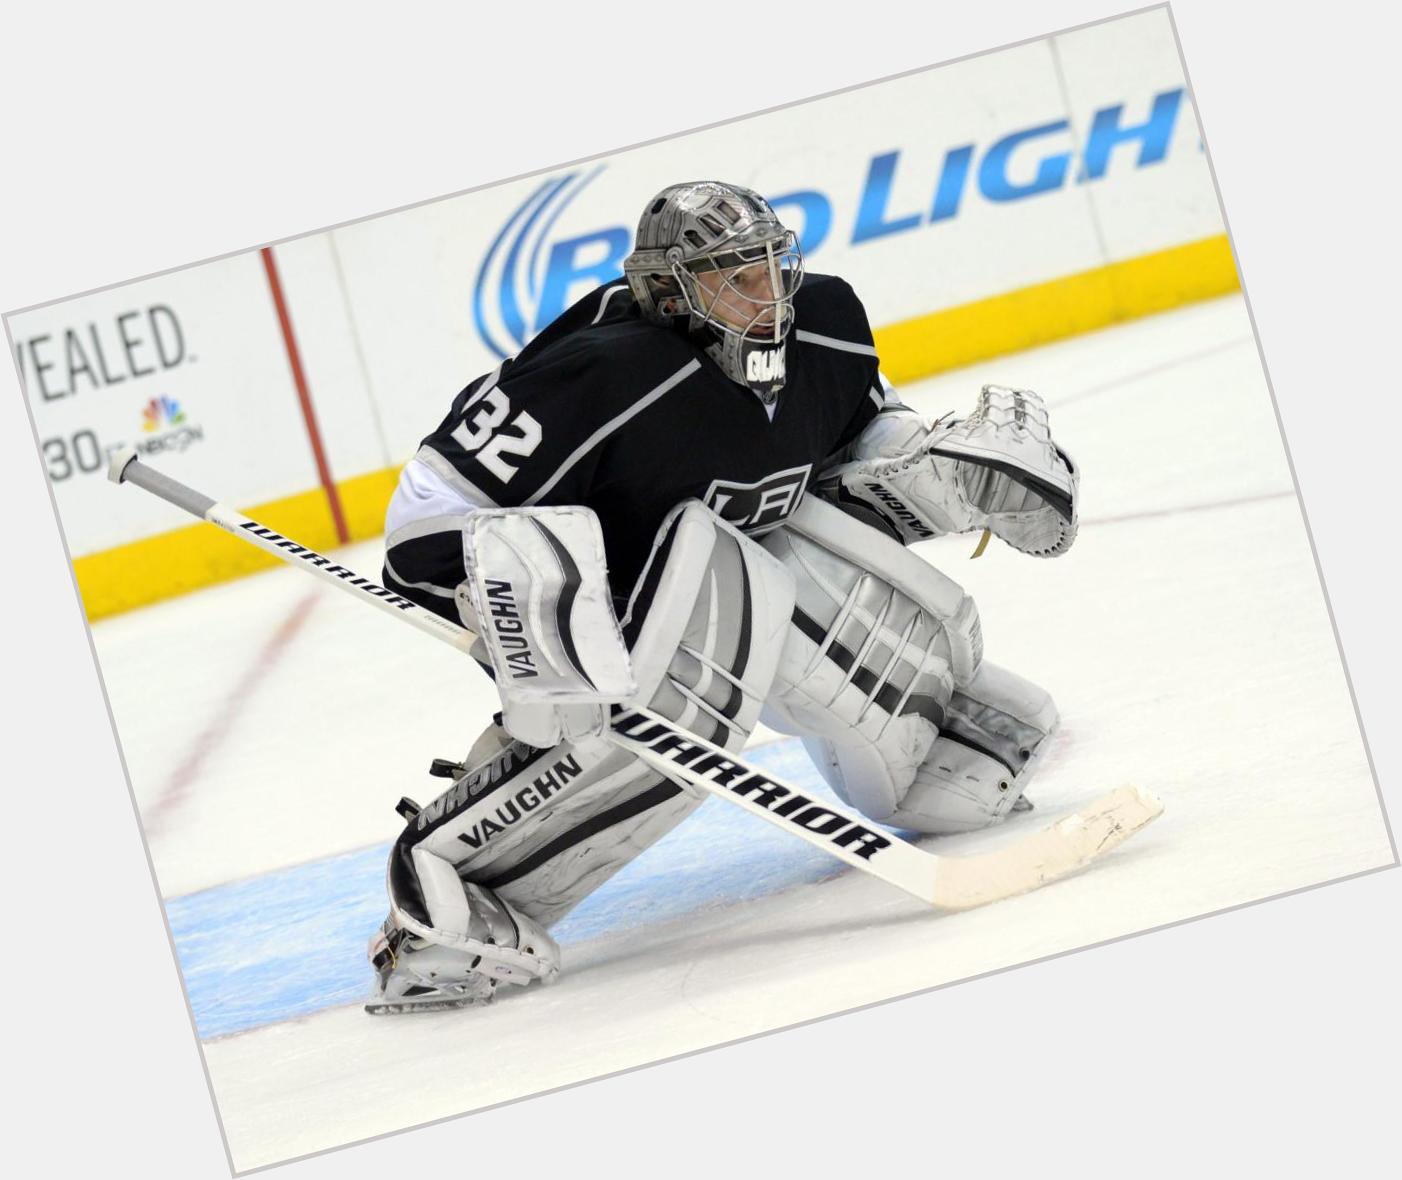 Happy Birthday to Jonathan Quick, who turns 29 today! 